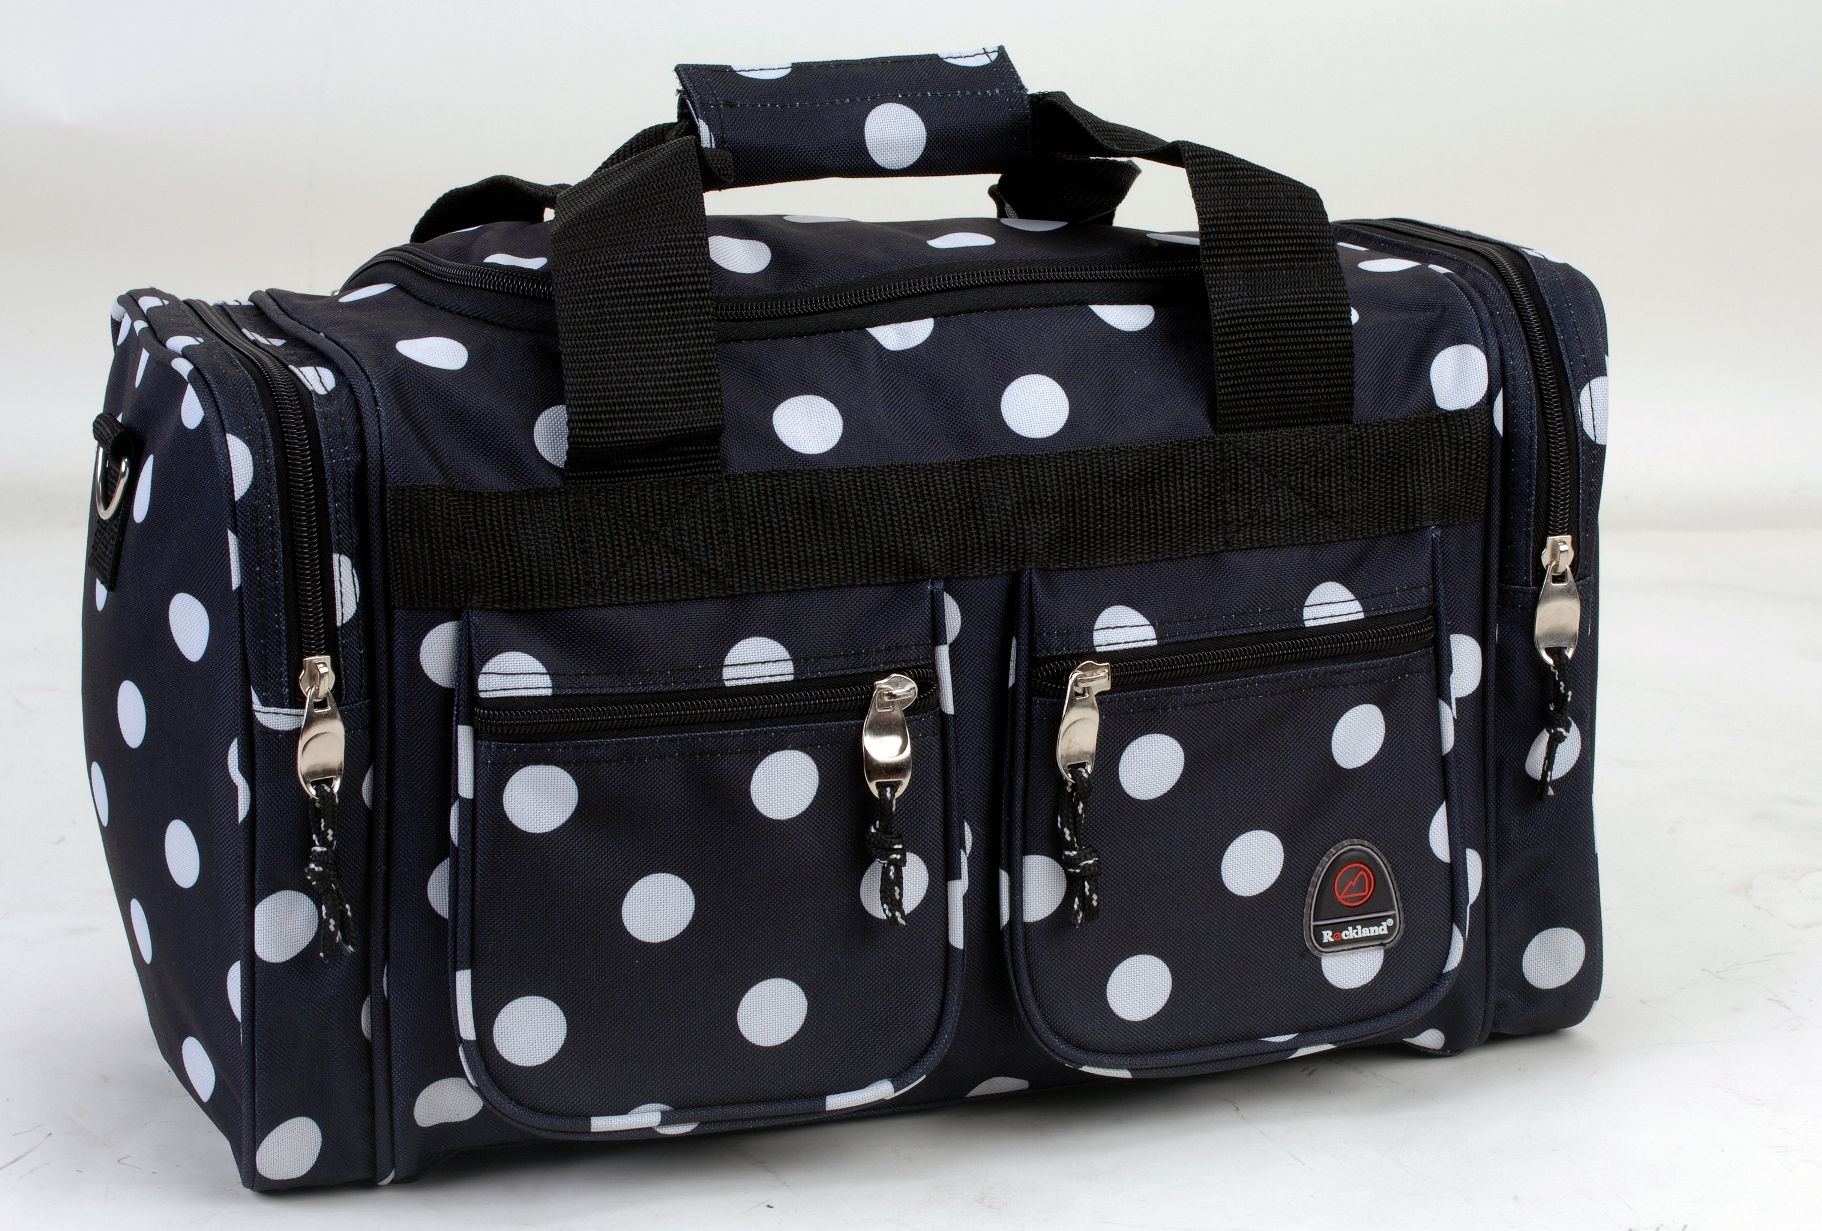 Rockland Fox Luggage 19inch Tote Bag, Black Dots - Home - Luggage & Travel Gear - Carry-on ...